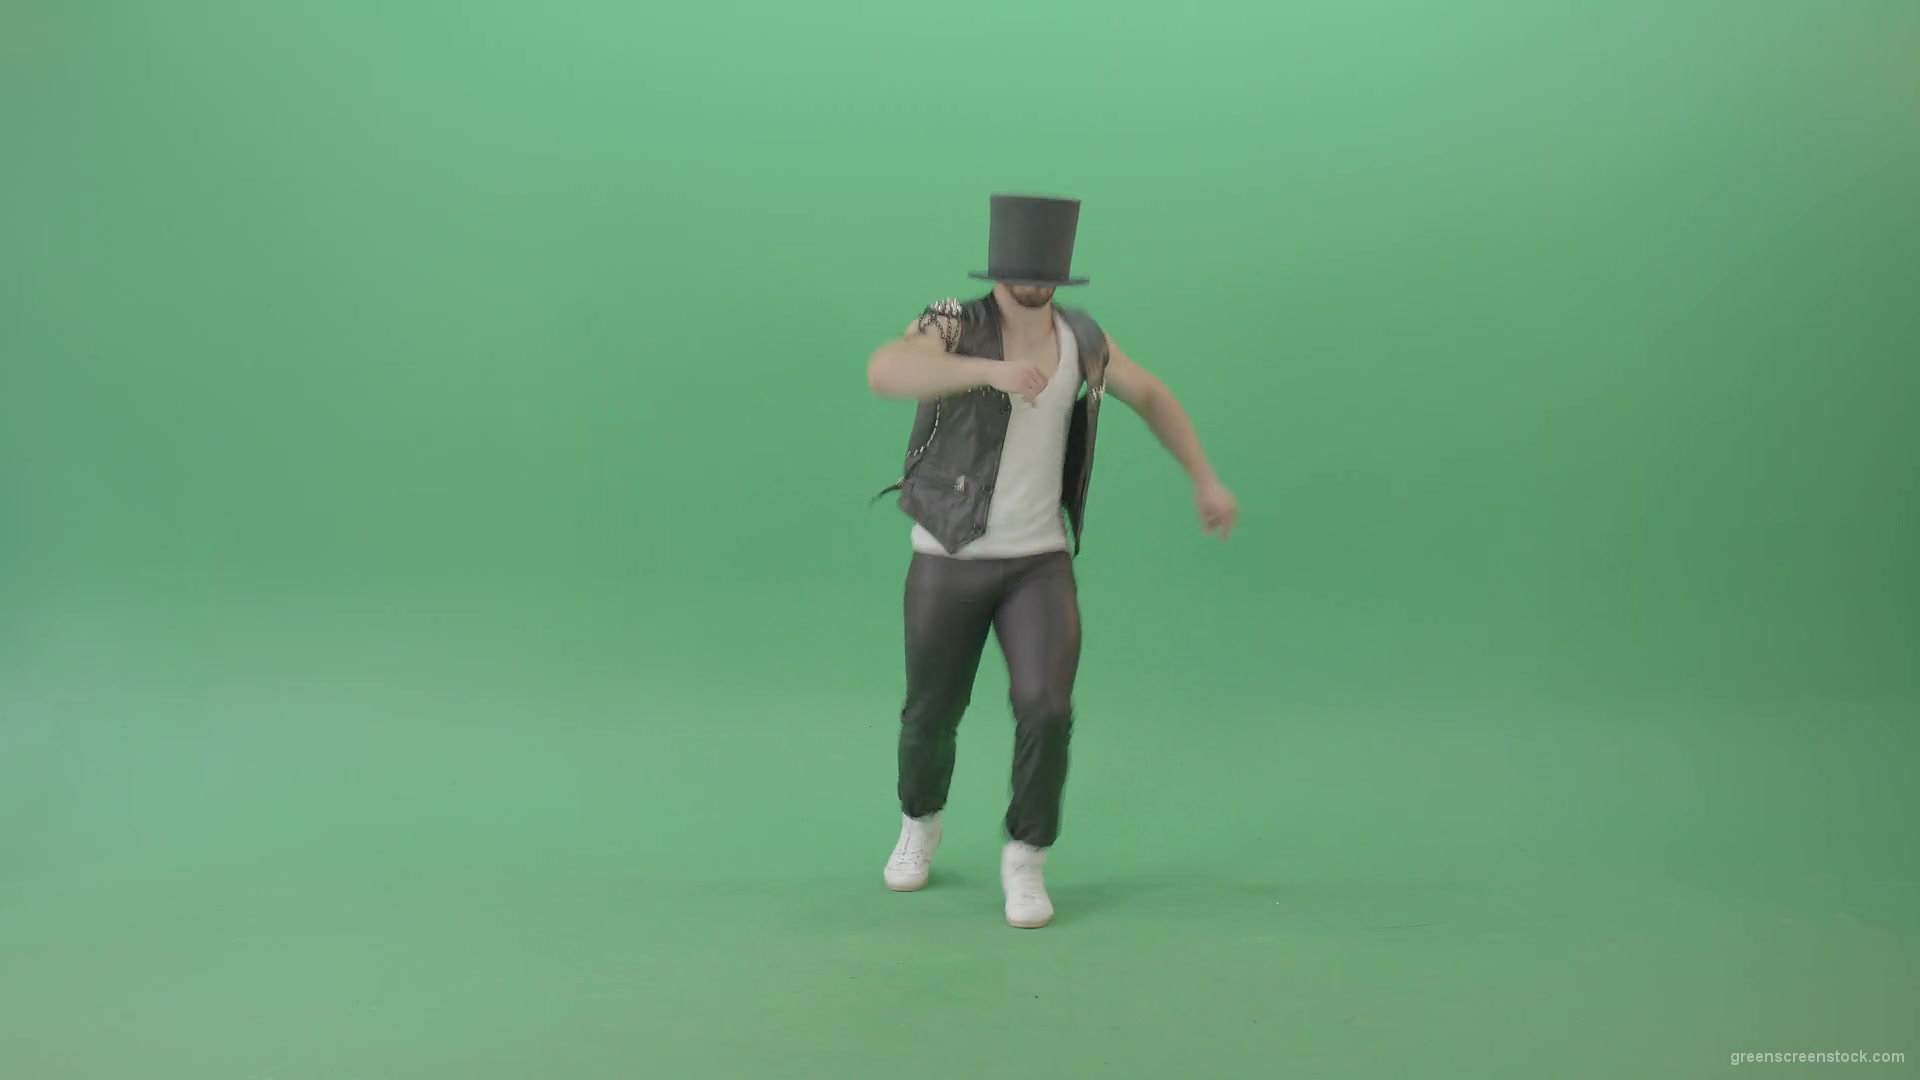 Funny-Man-in-Cylinder-Hat-and-black-fetish-costume-dancing-and-jumping-over-Green-Screen-4K-Video-Footage-1920_004 Green Screen Stock